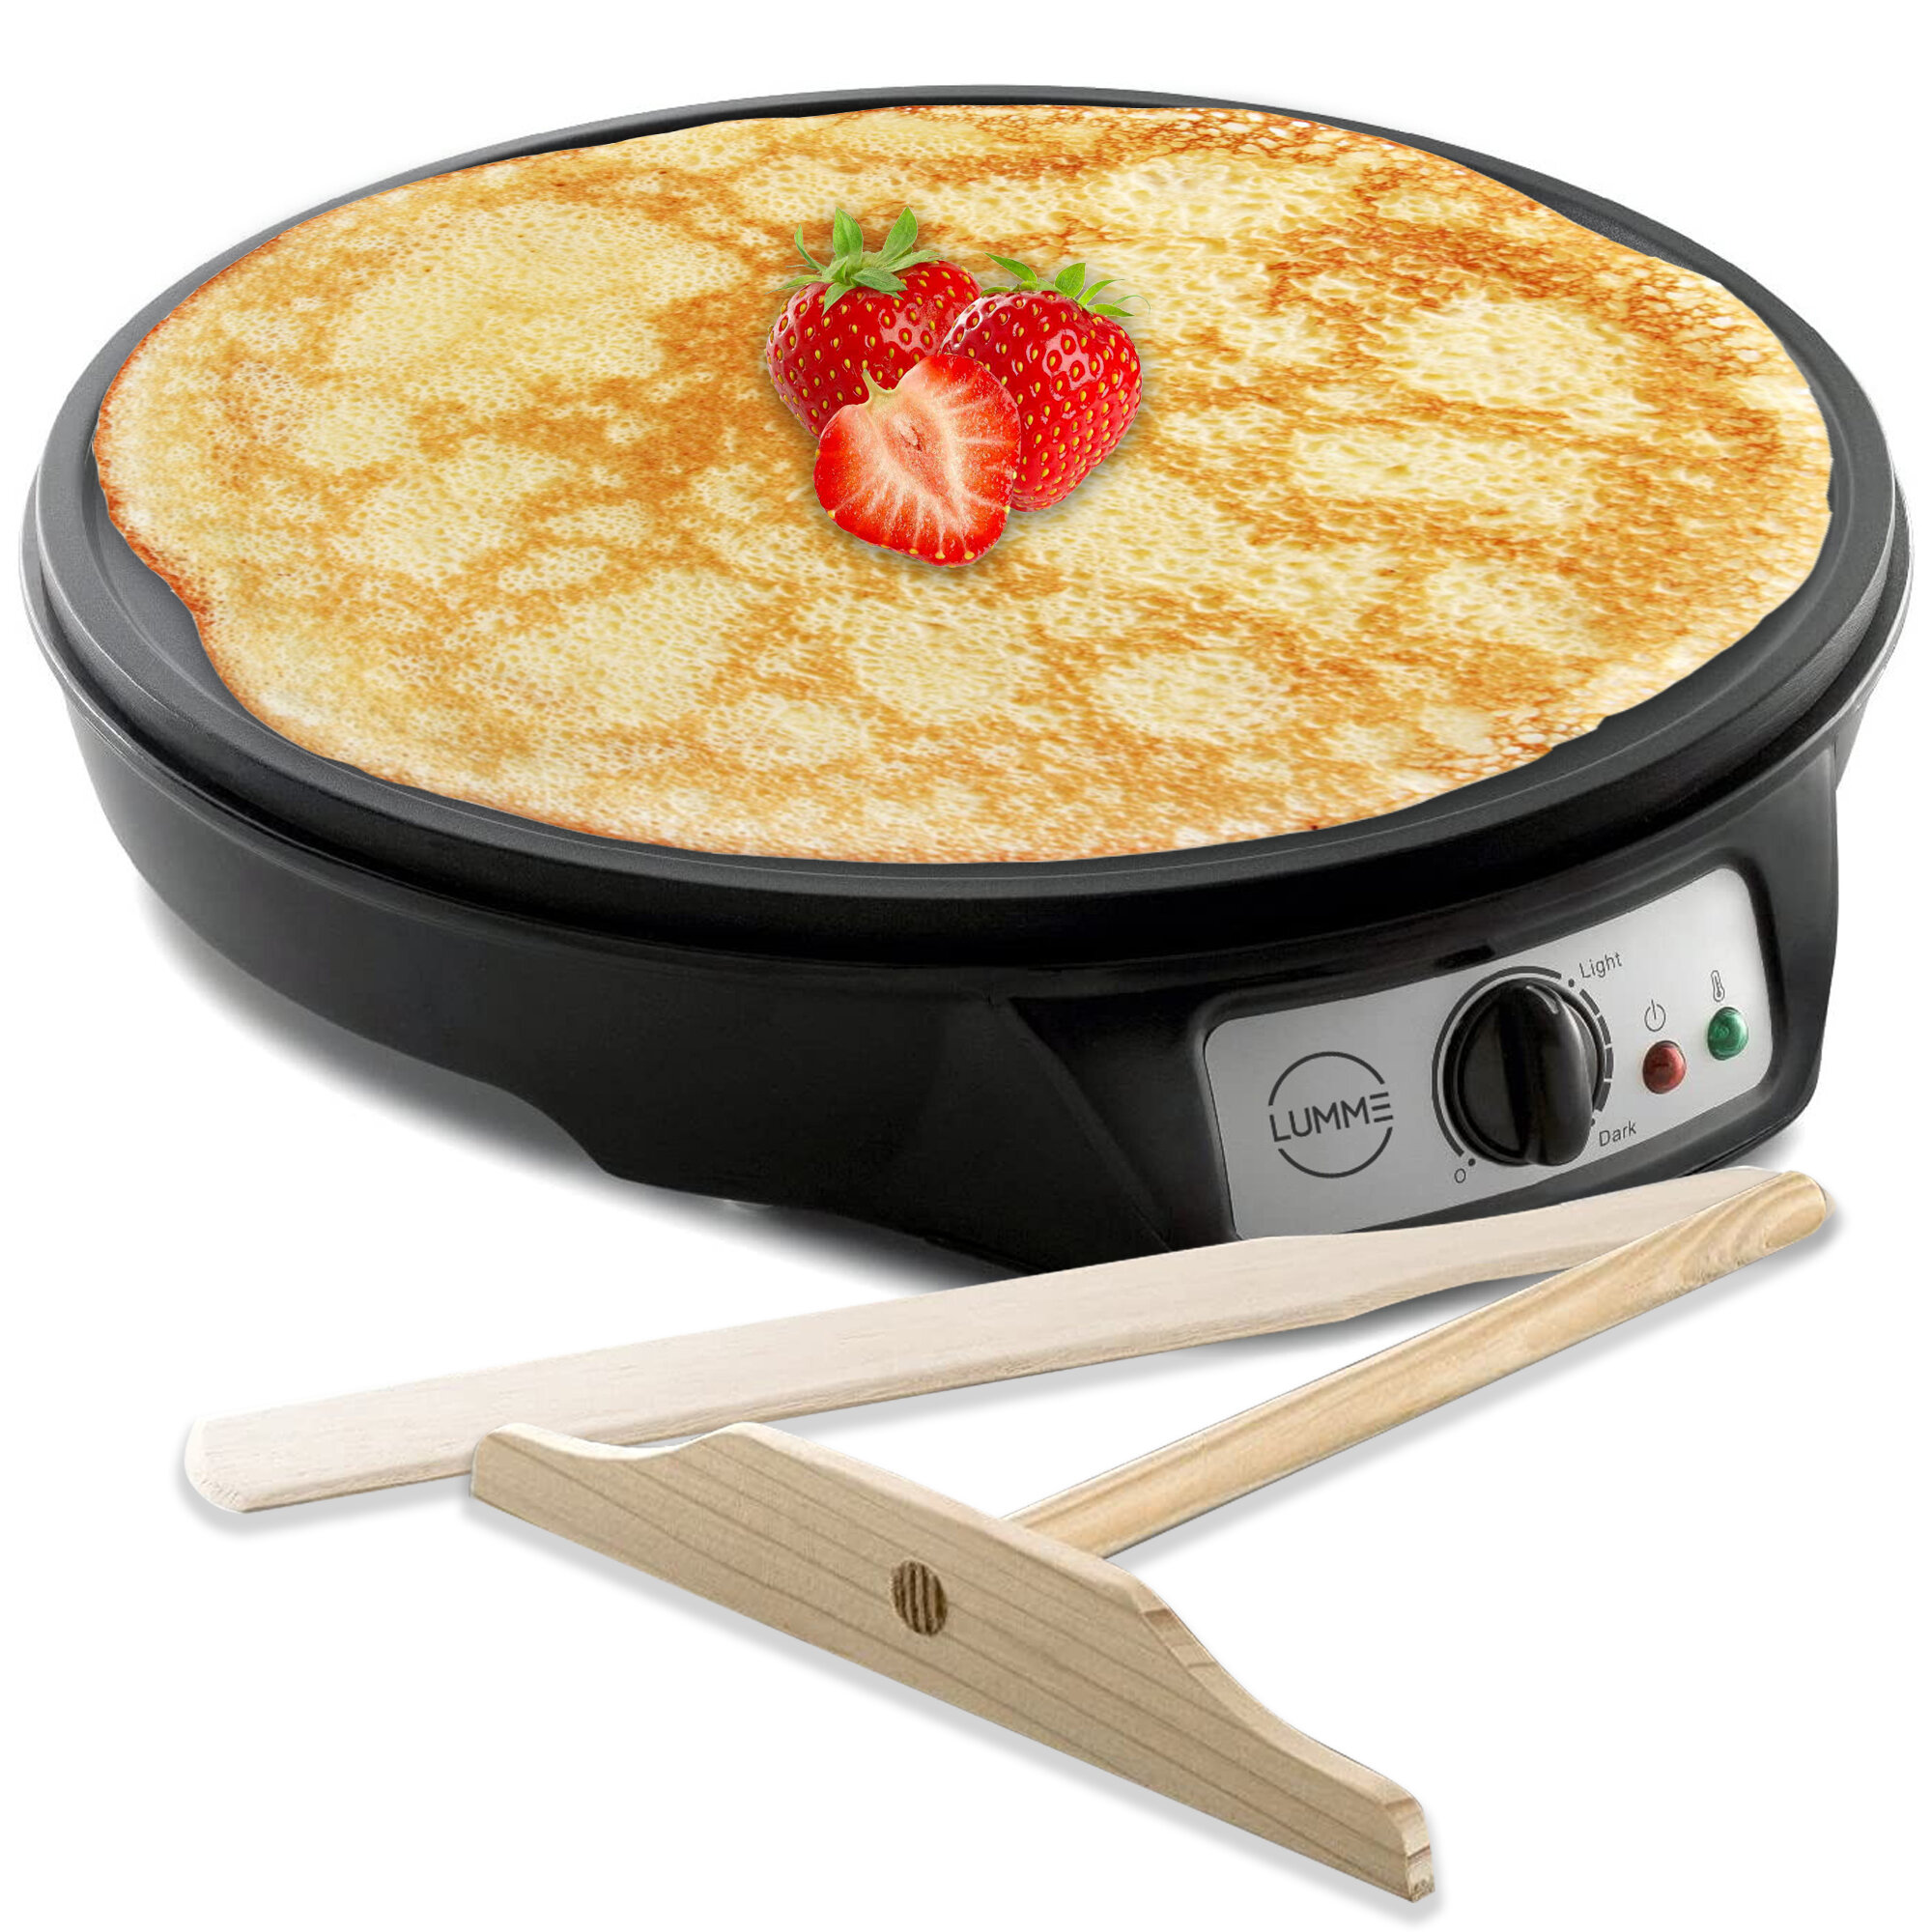  Electric Crepe Maker, iSiLER Nonstick Pancake Maker Griddle, 12  inches Crepe Pan with Spreader & Spatula, Temperature Control for Roti,  Tortilla, Eggs: Home & Kitchen